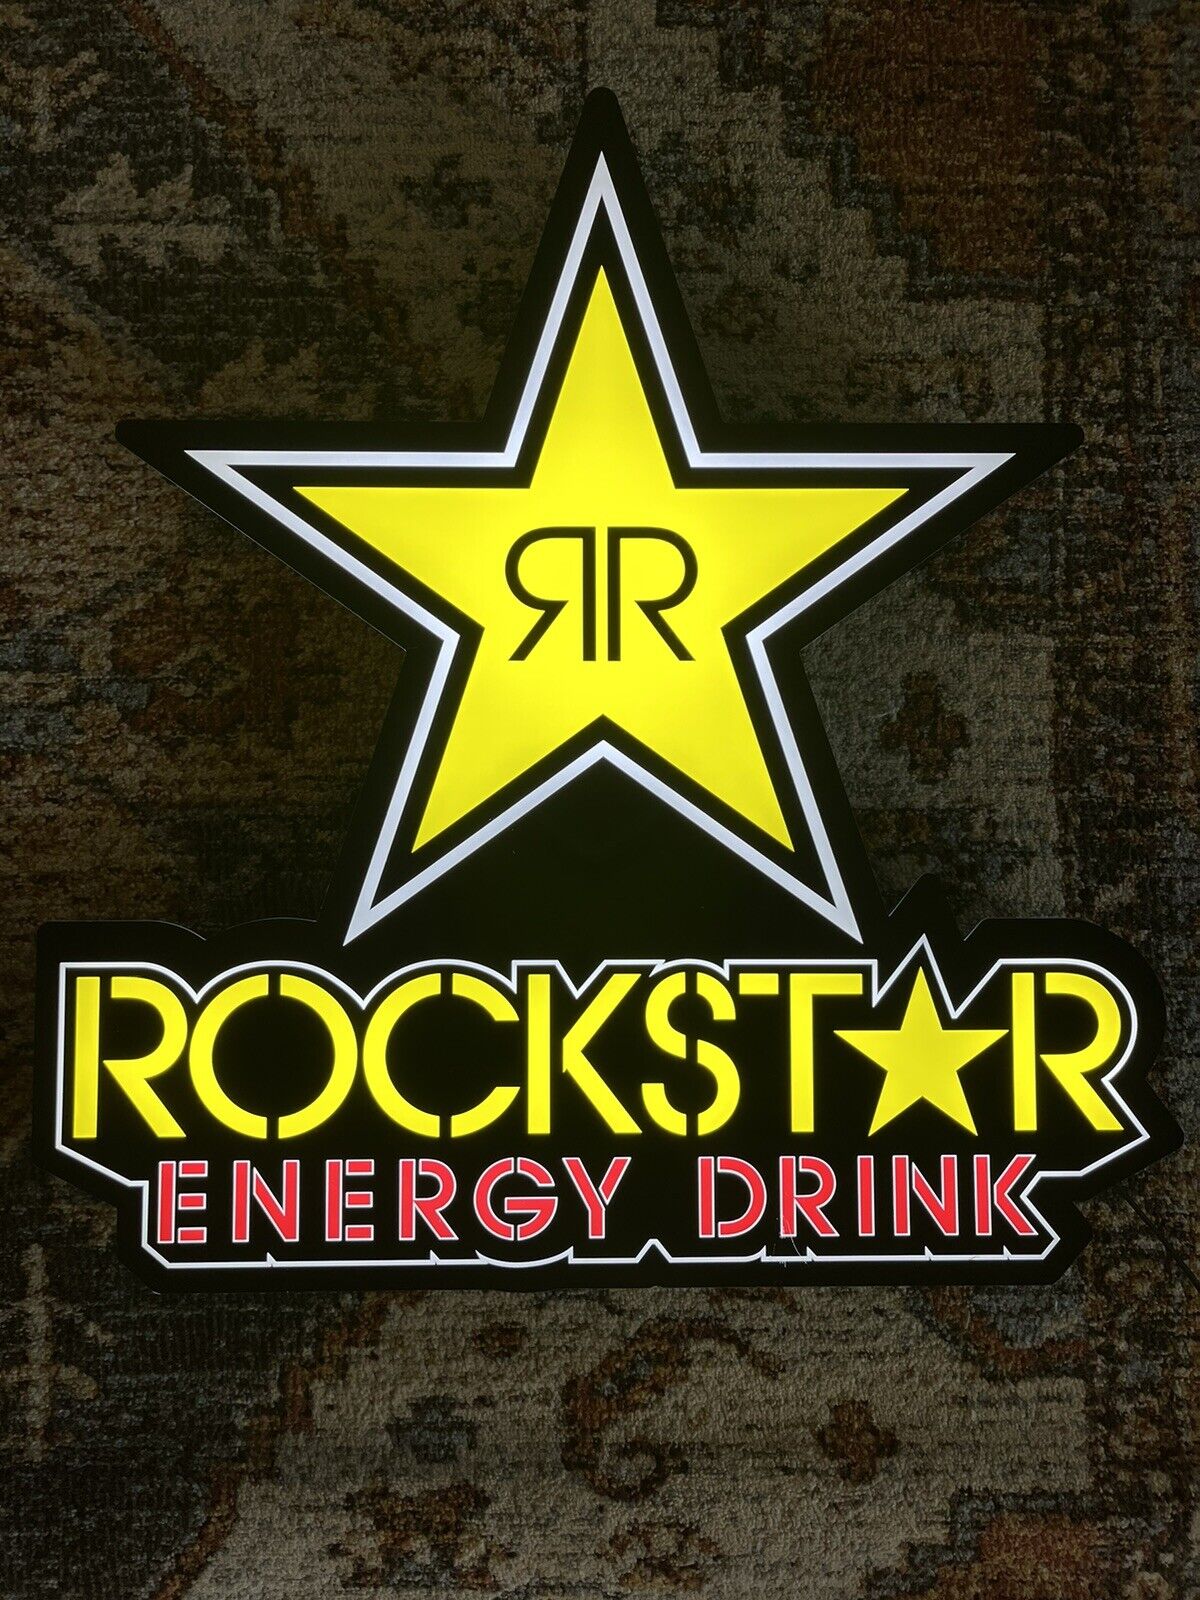 Rockstar Energy Drink Light Sign 30”x29.5”x3.5”/ Tested Working/ Excellent